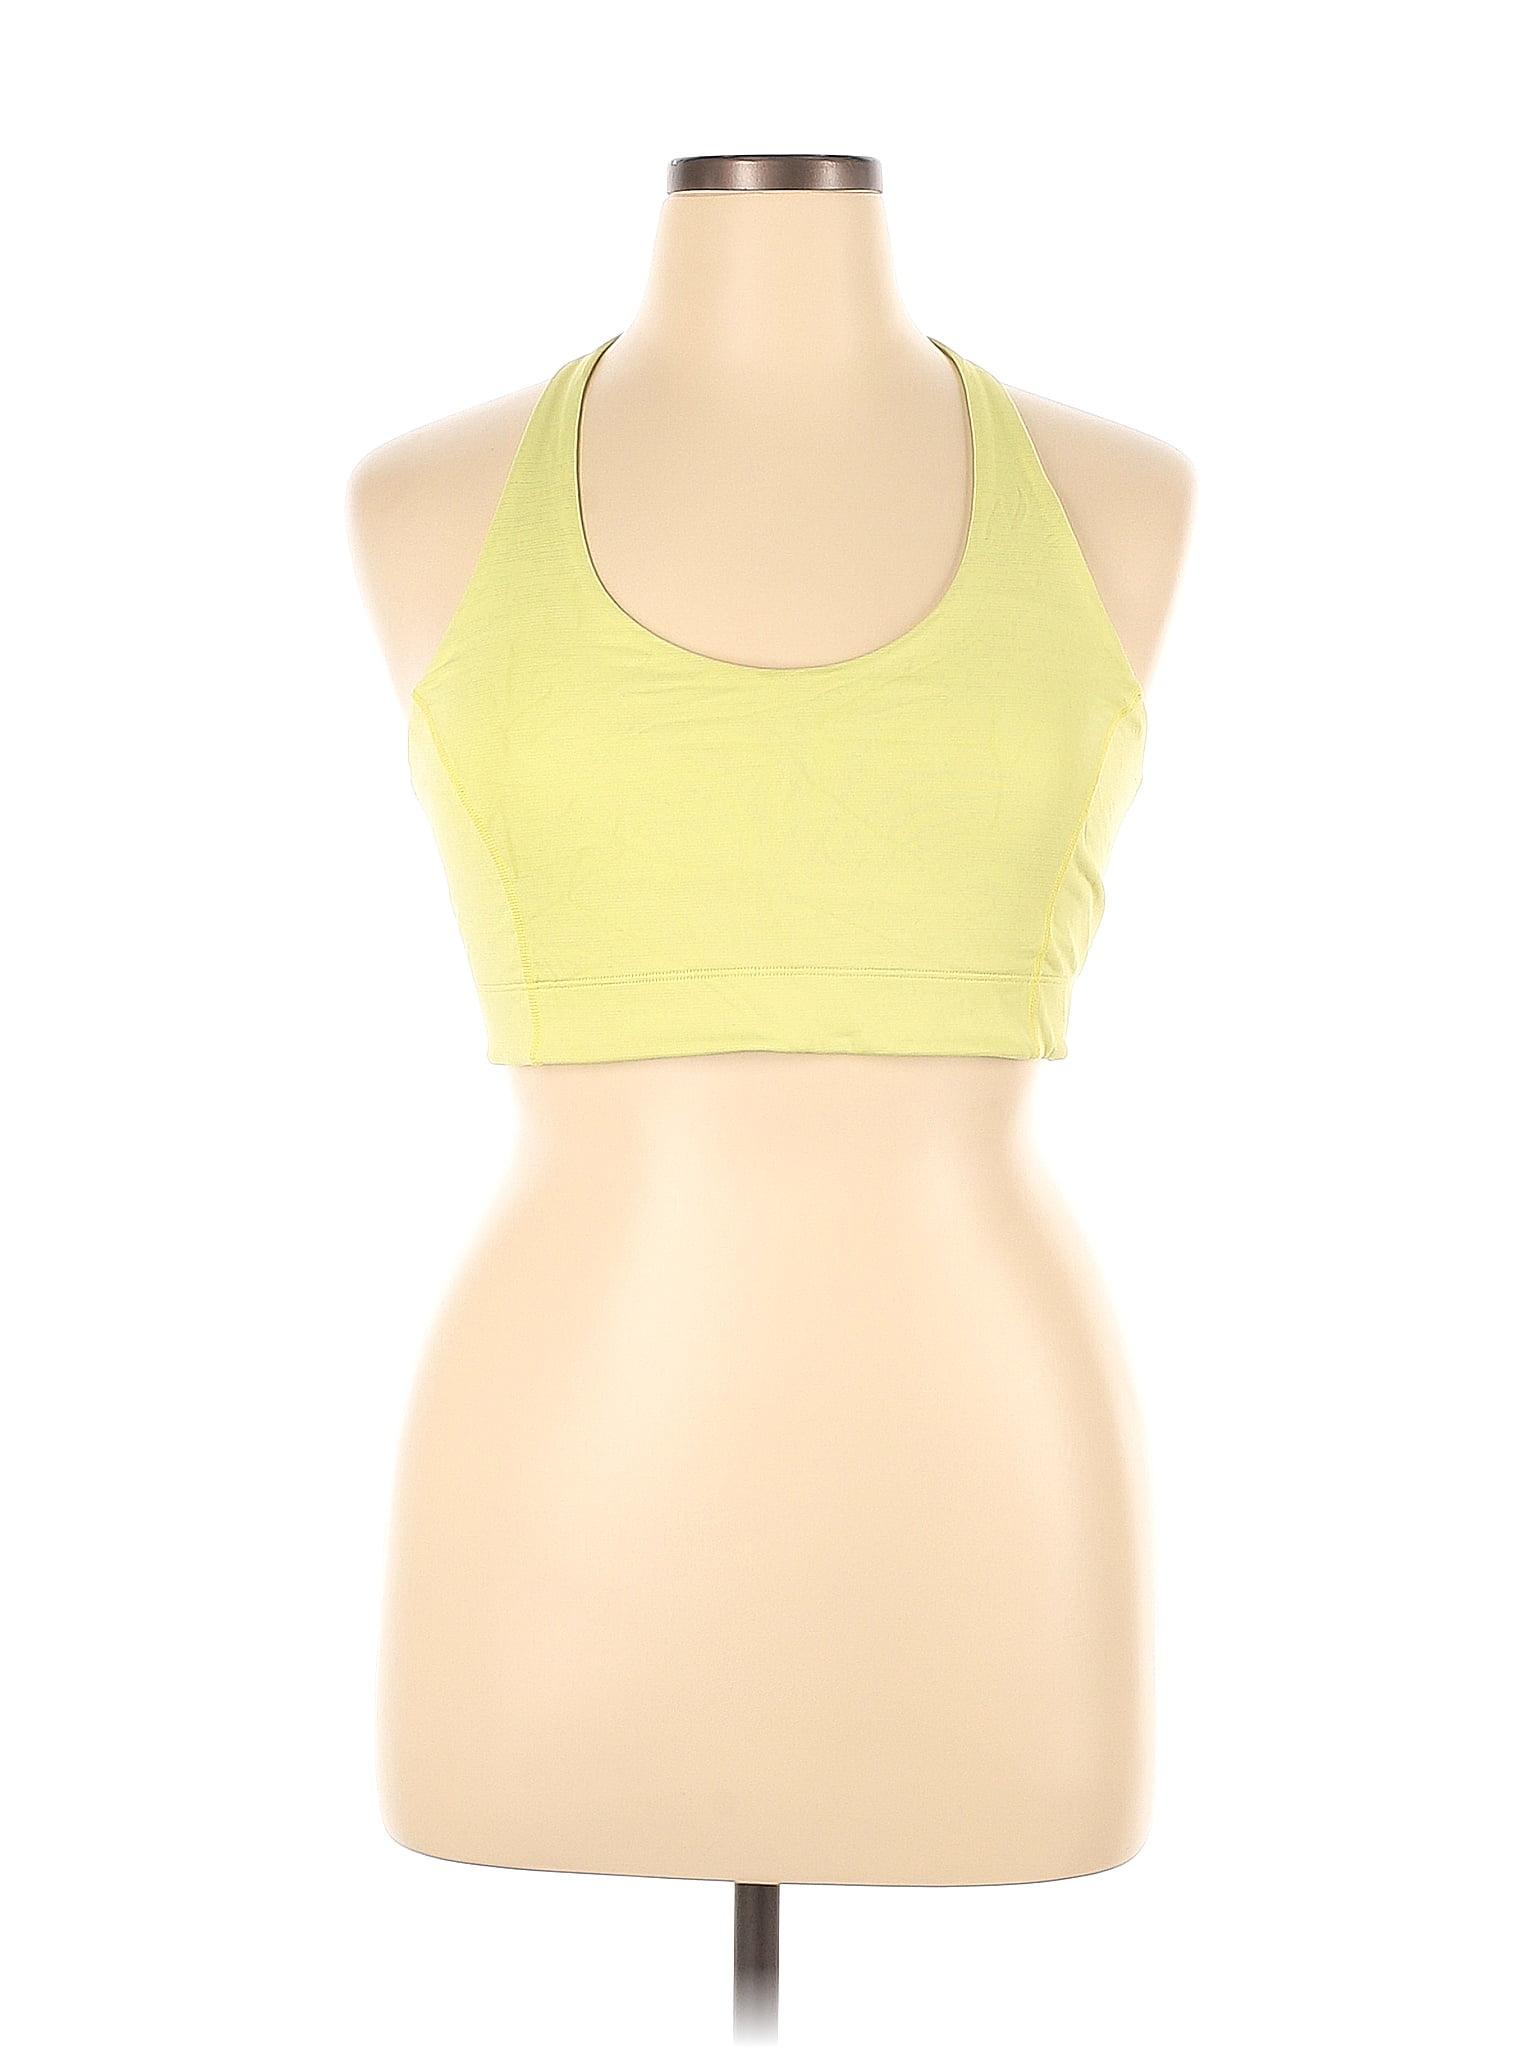 Outdoor voices women's doing things sports bra size XL sunshine yellow